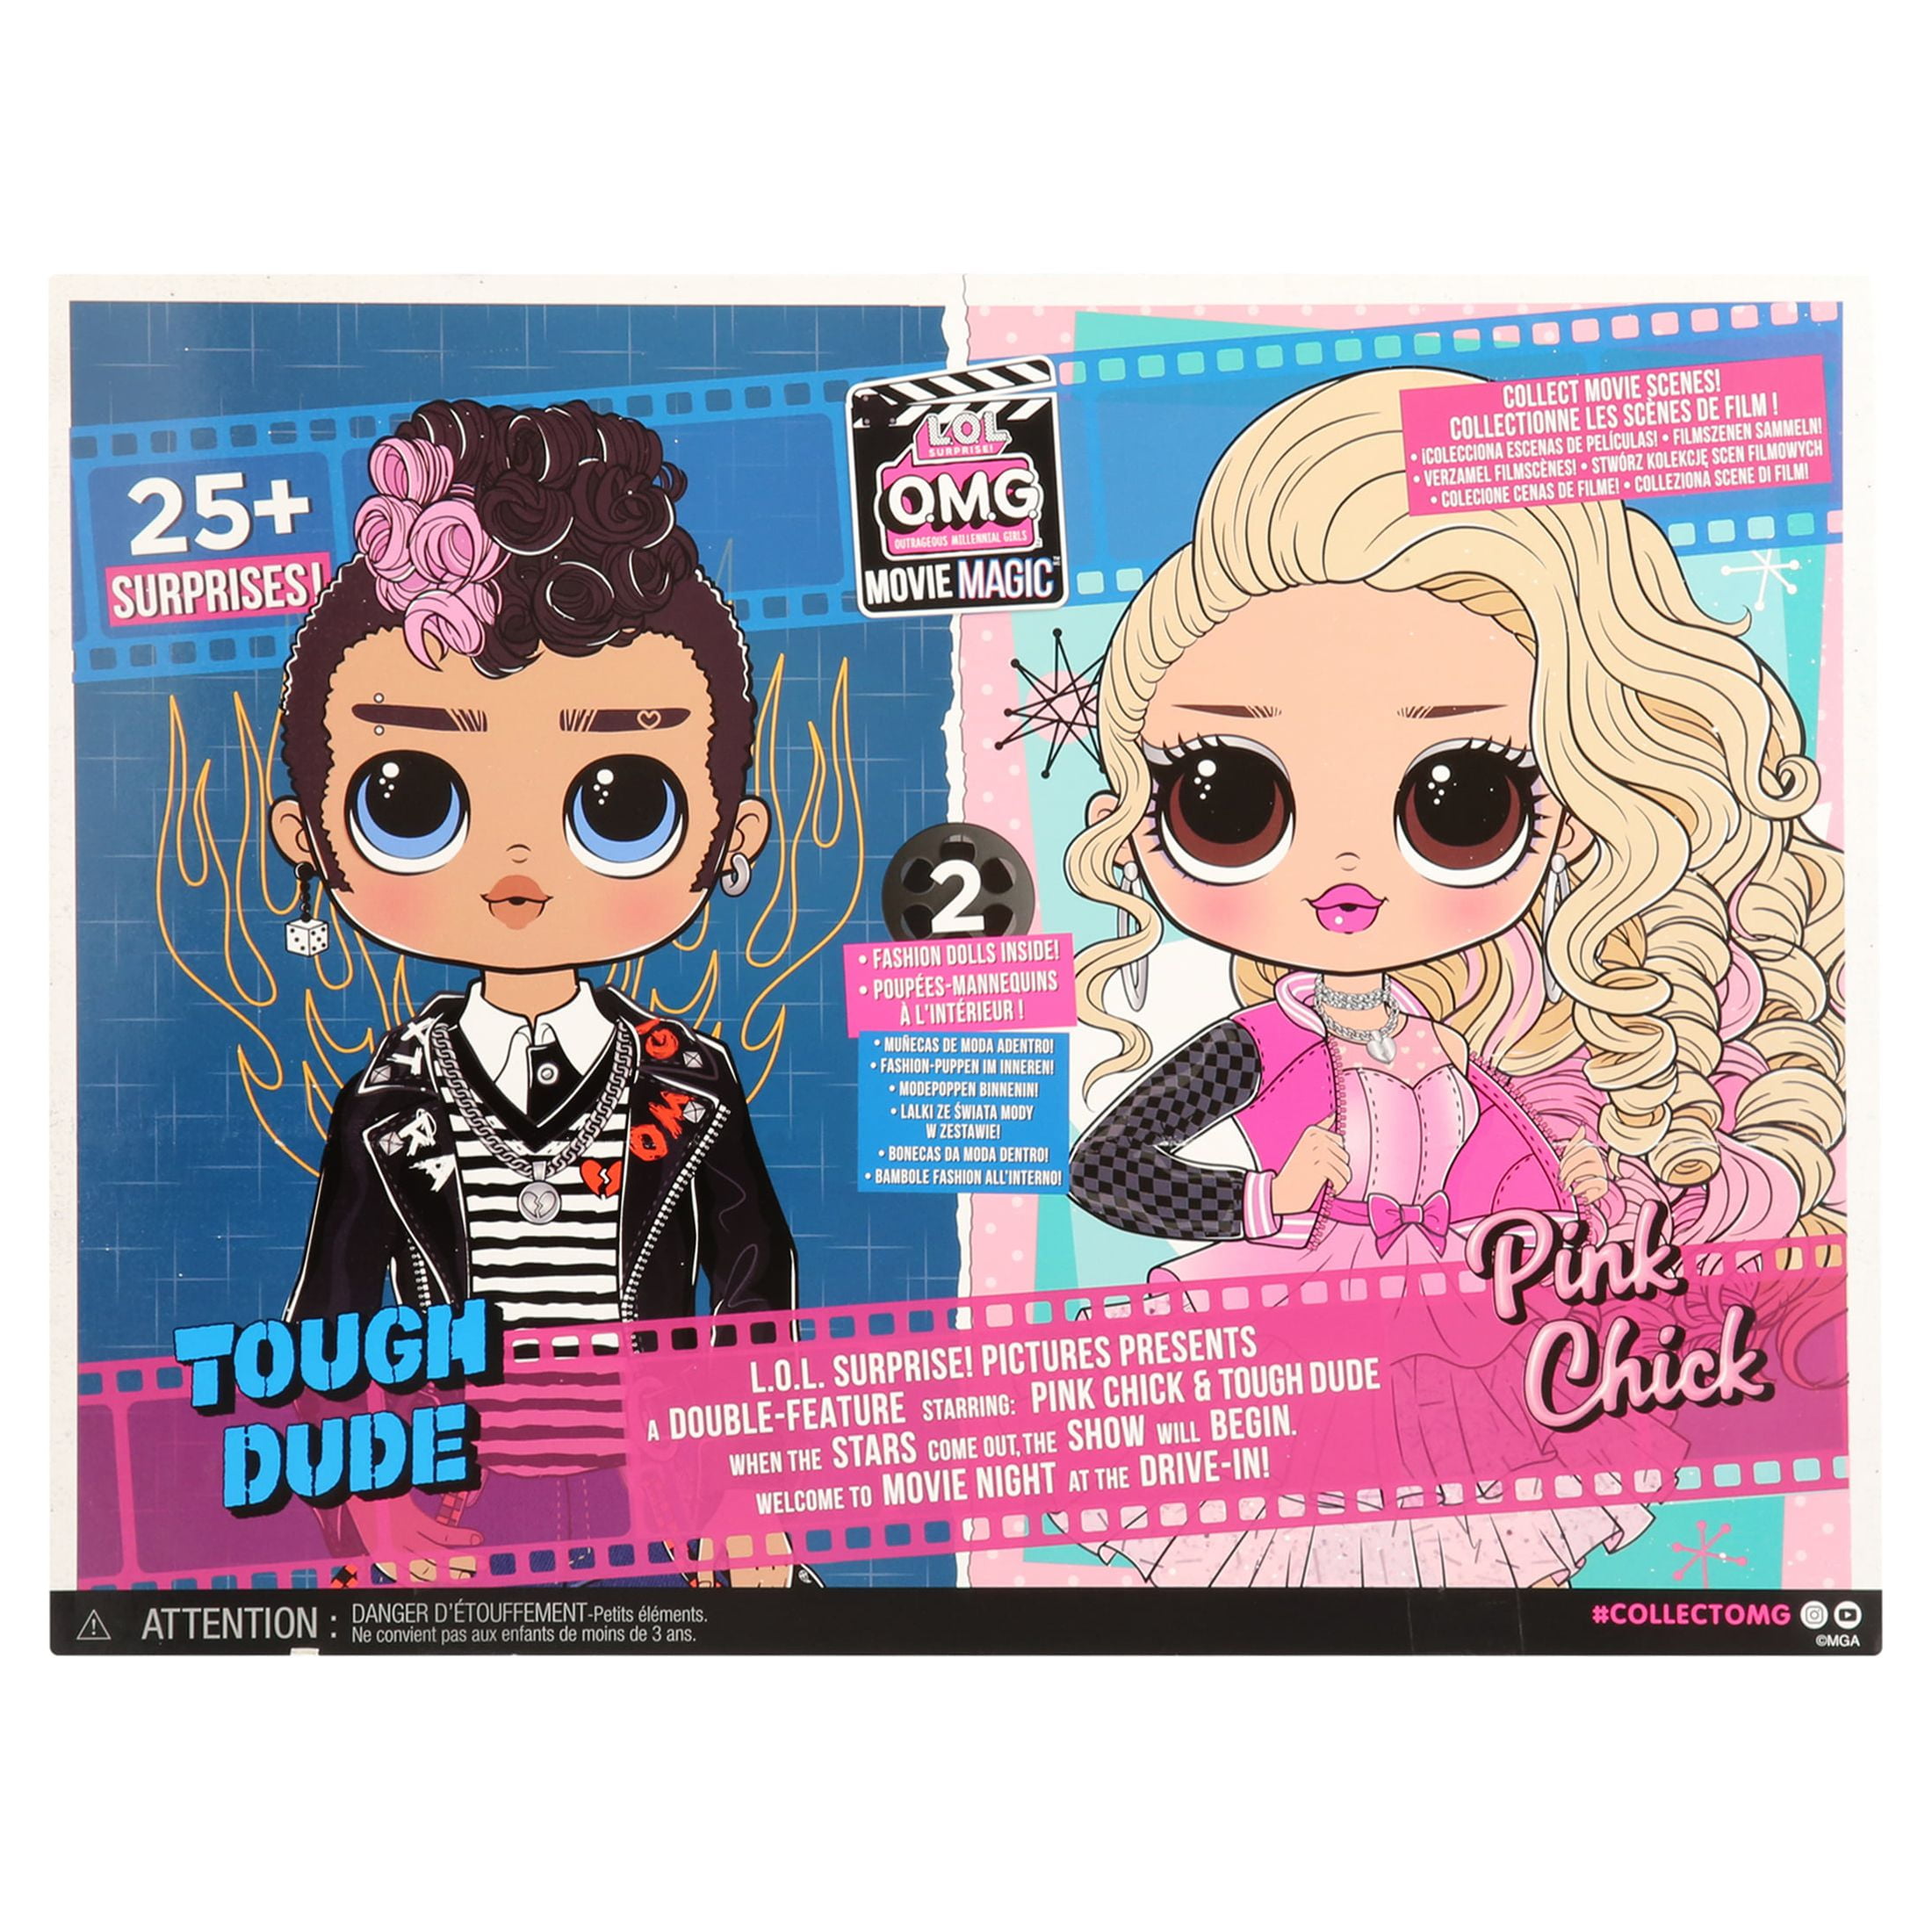 Every LOL Surprise OMG Doll EVER!!😻 Complete Collection Tour + Tweens!  💖🍵 